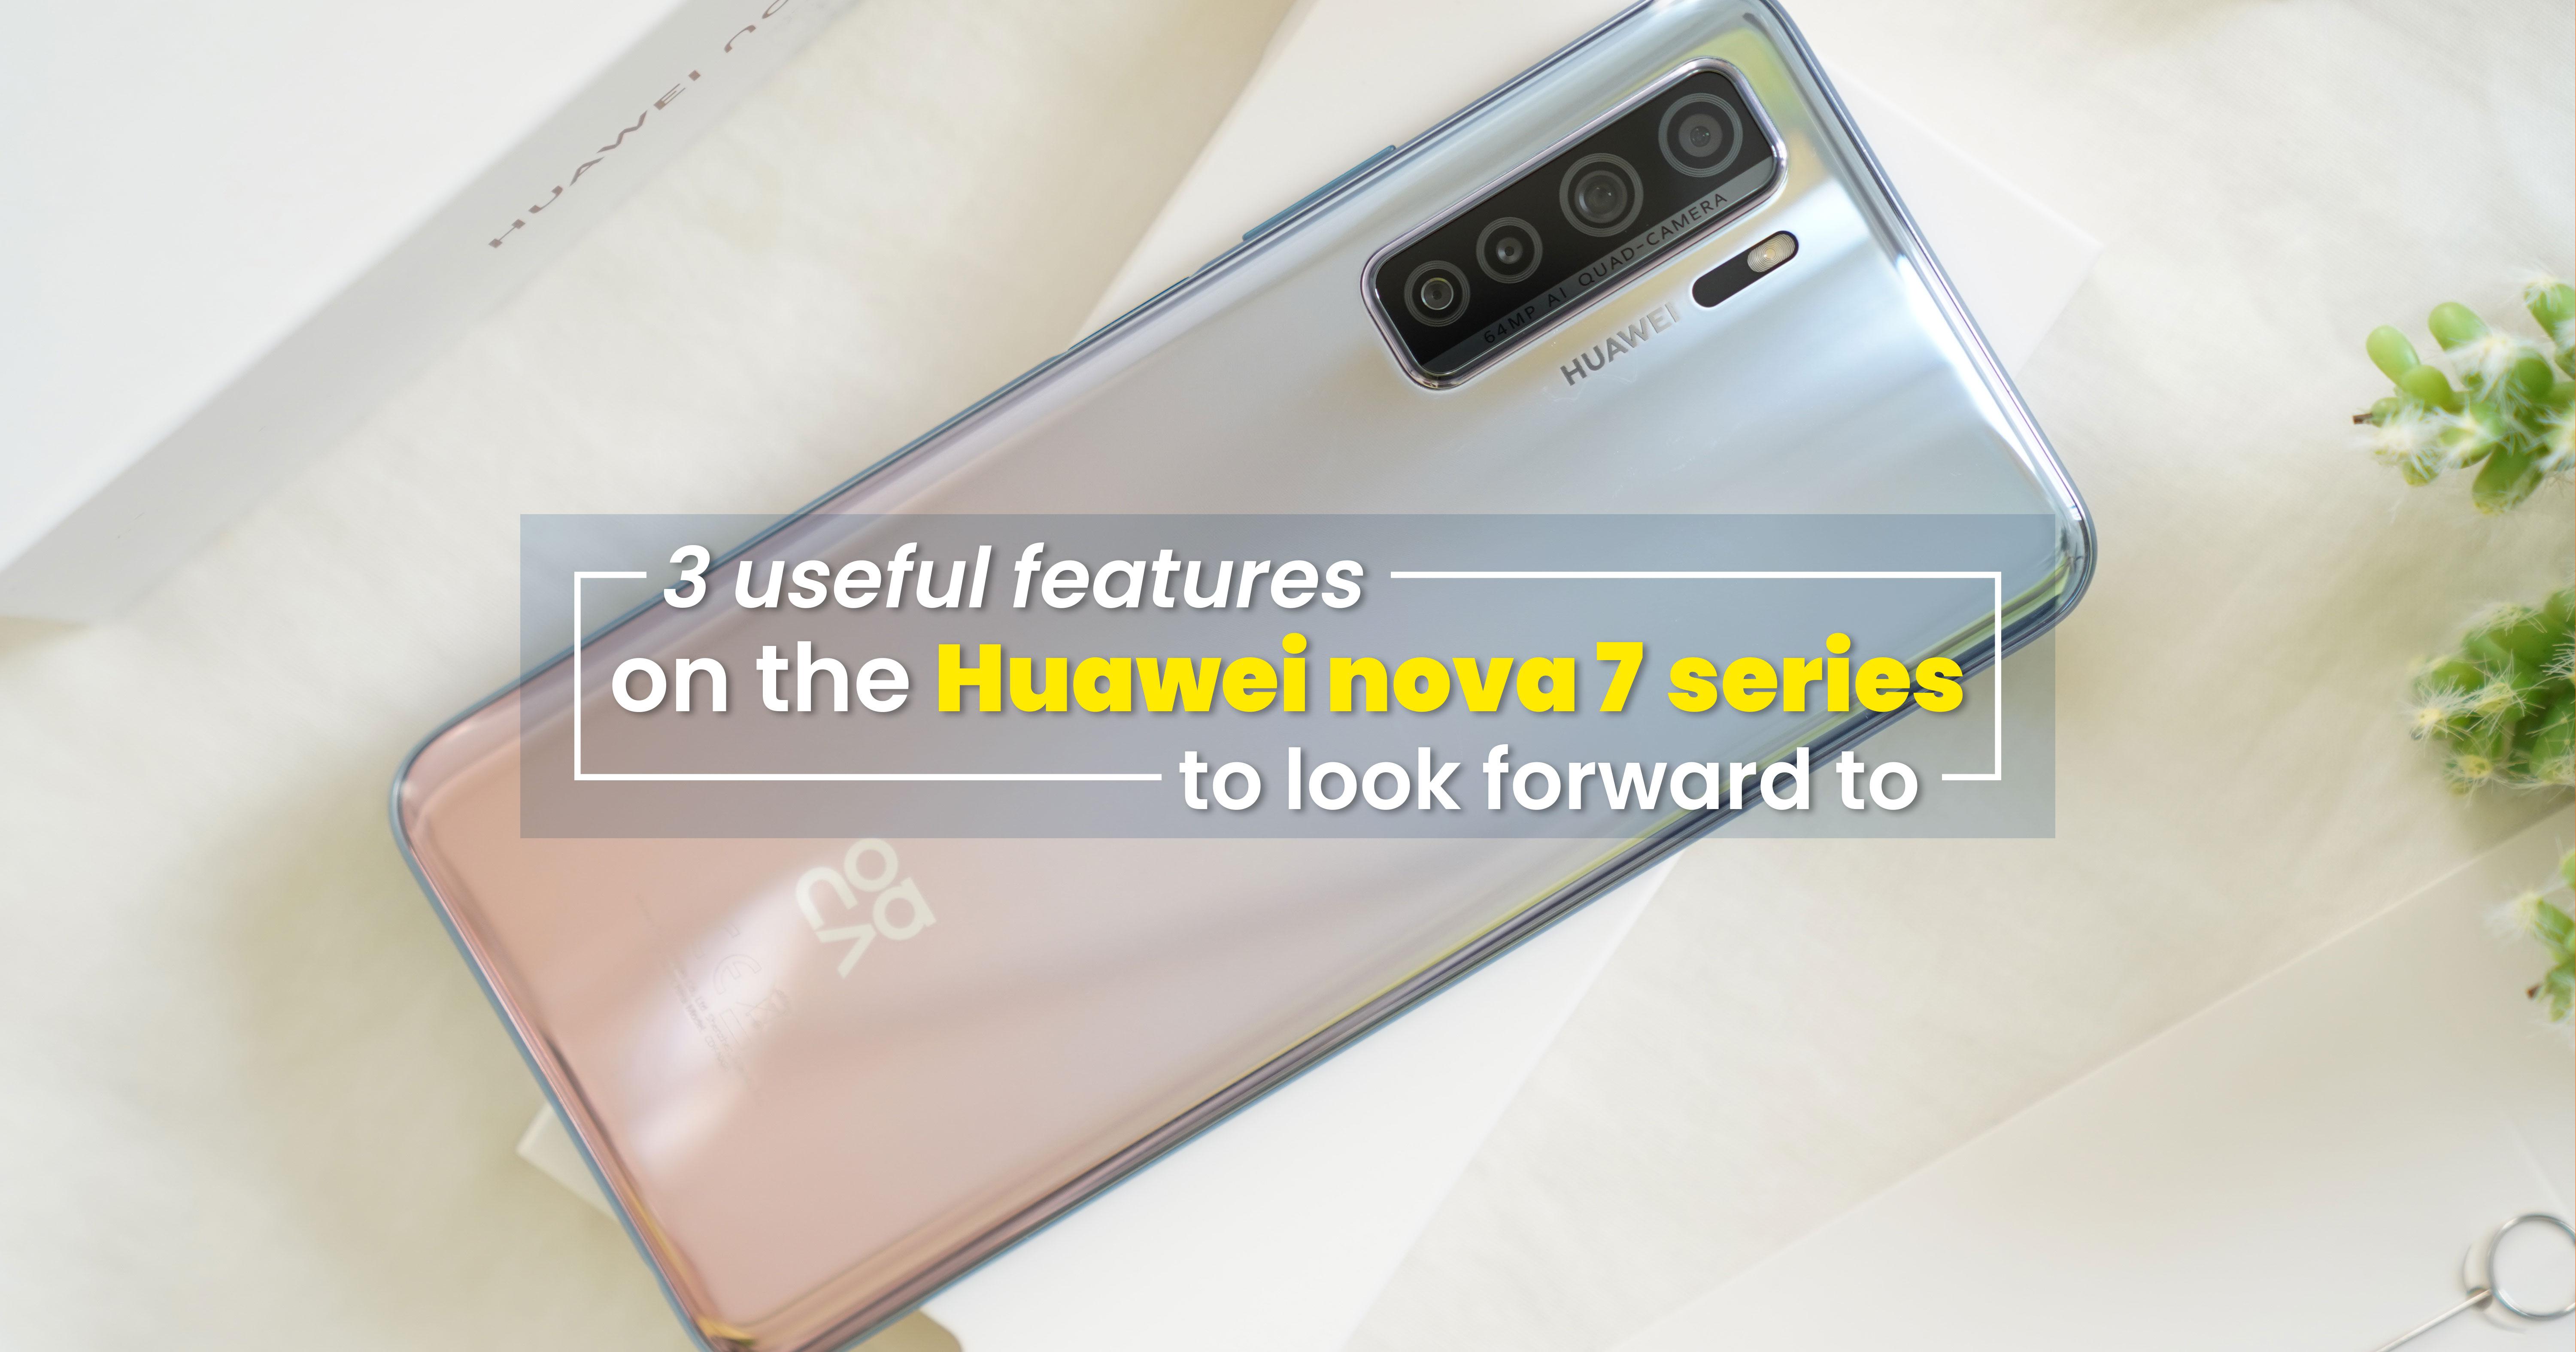 3 useful features on the Huawei nova 7 series to look forward to